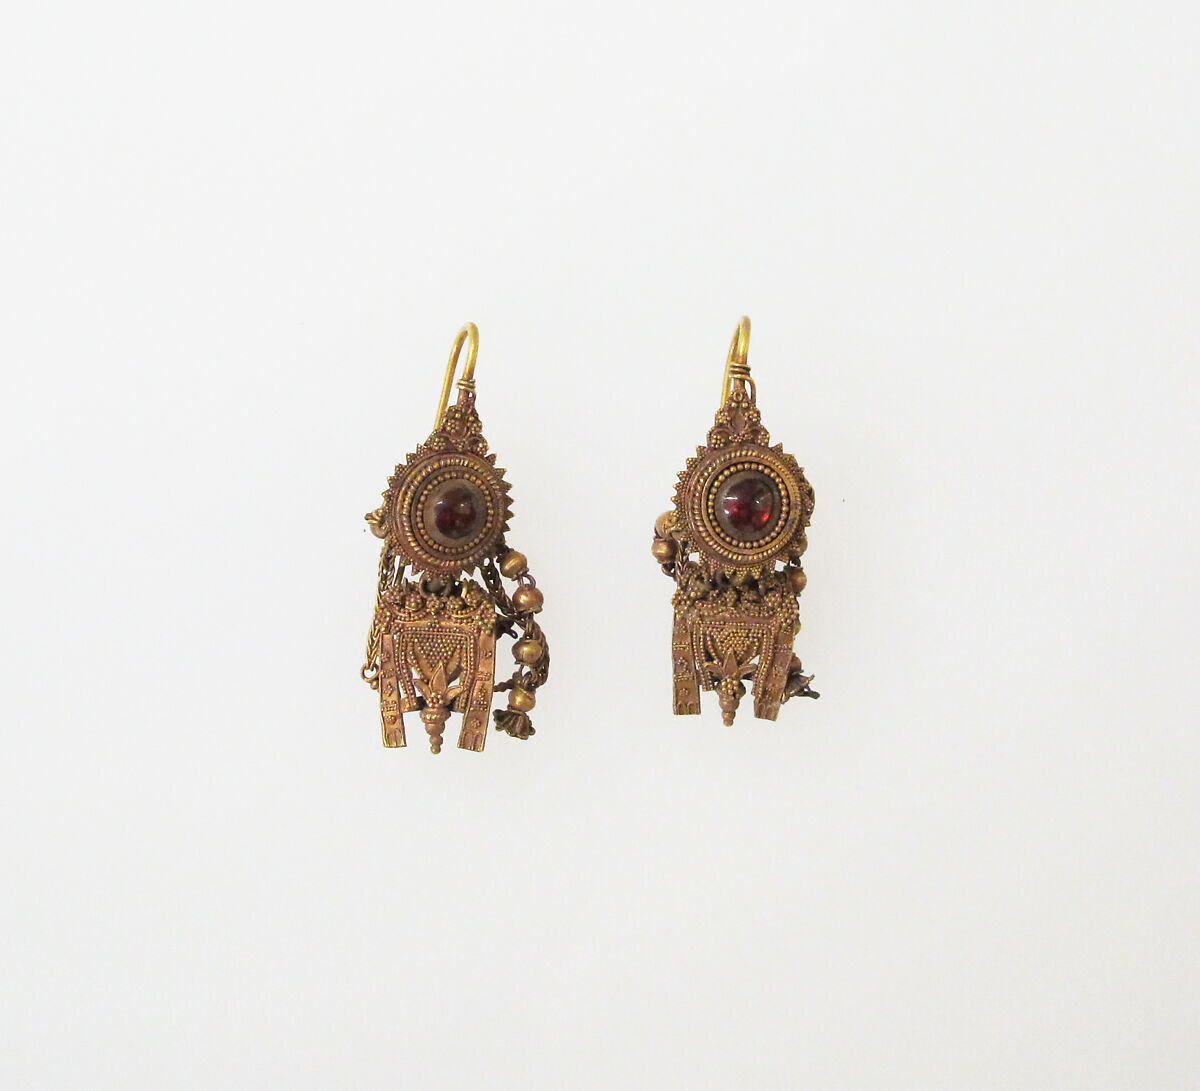 Earring with pendant and chains, Gold, garnet 